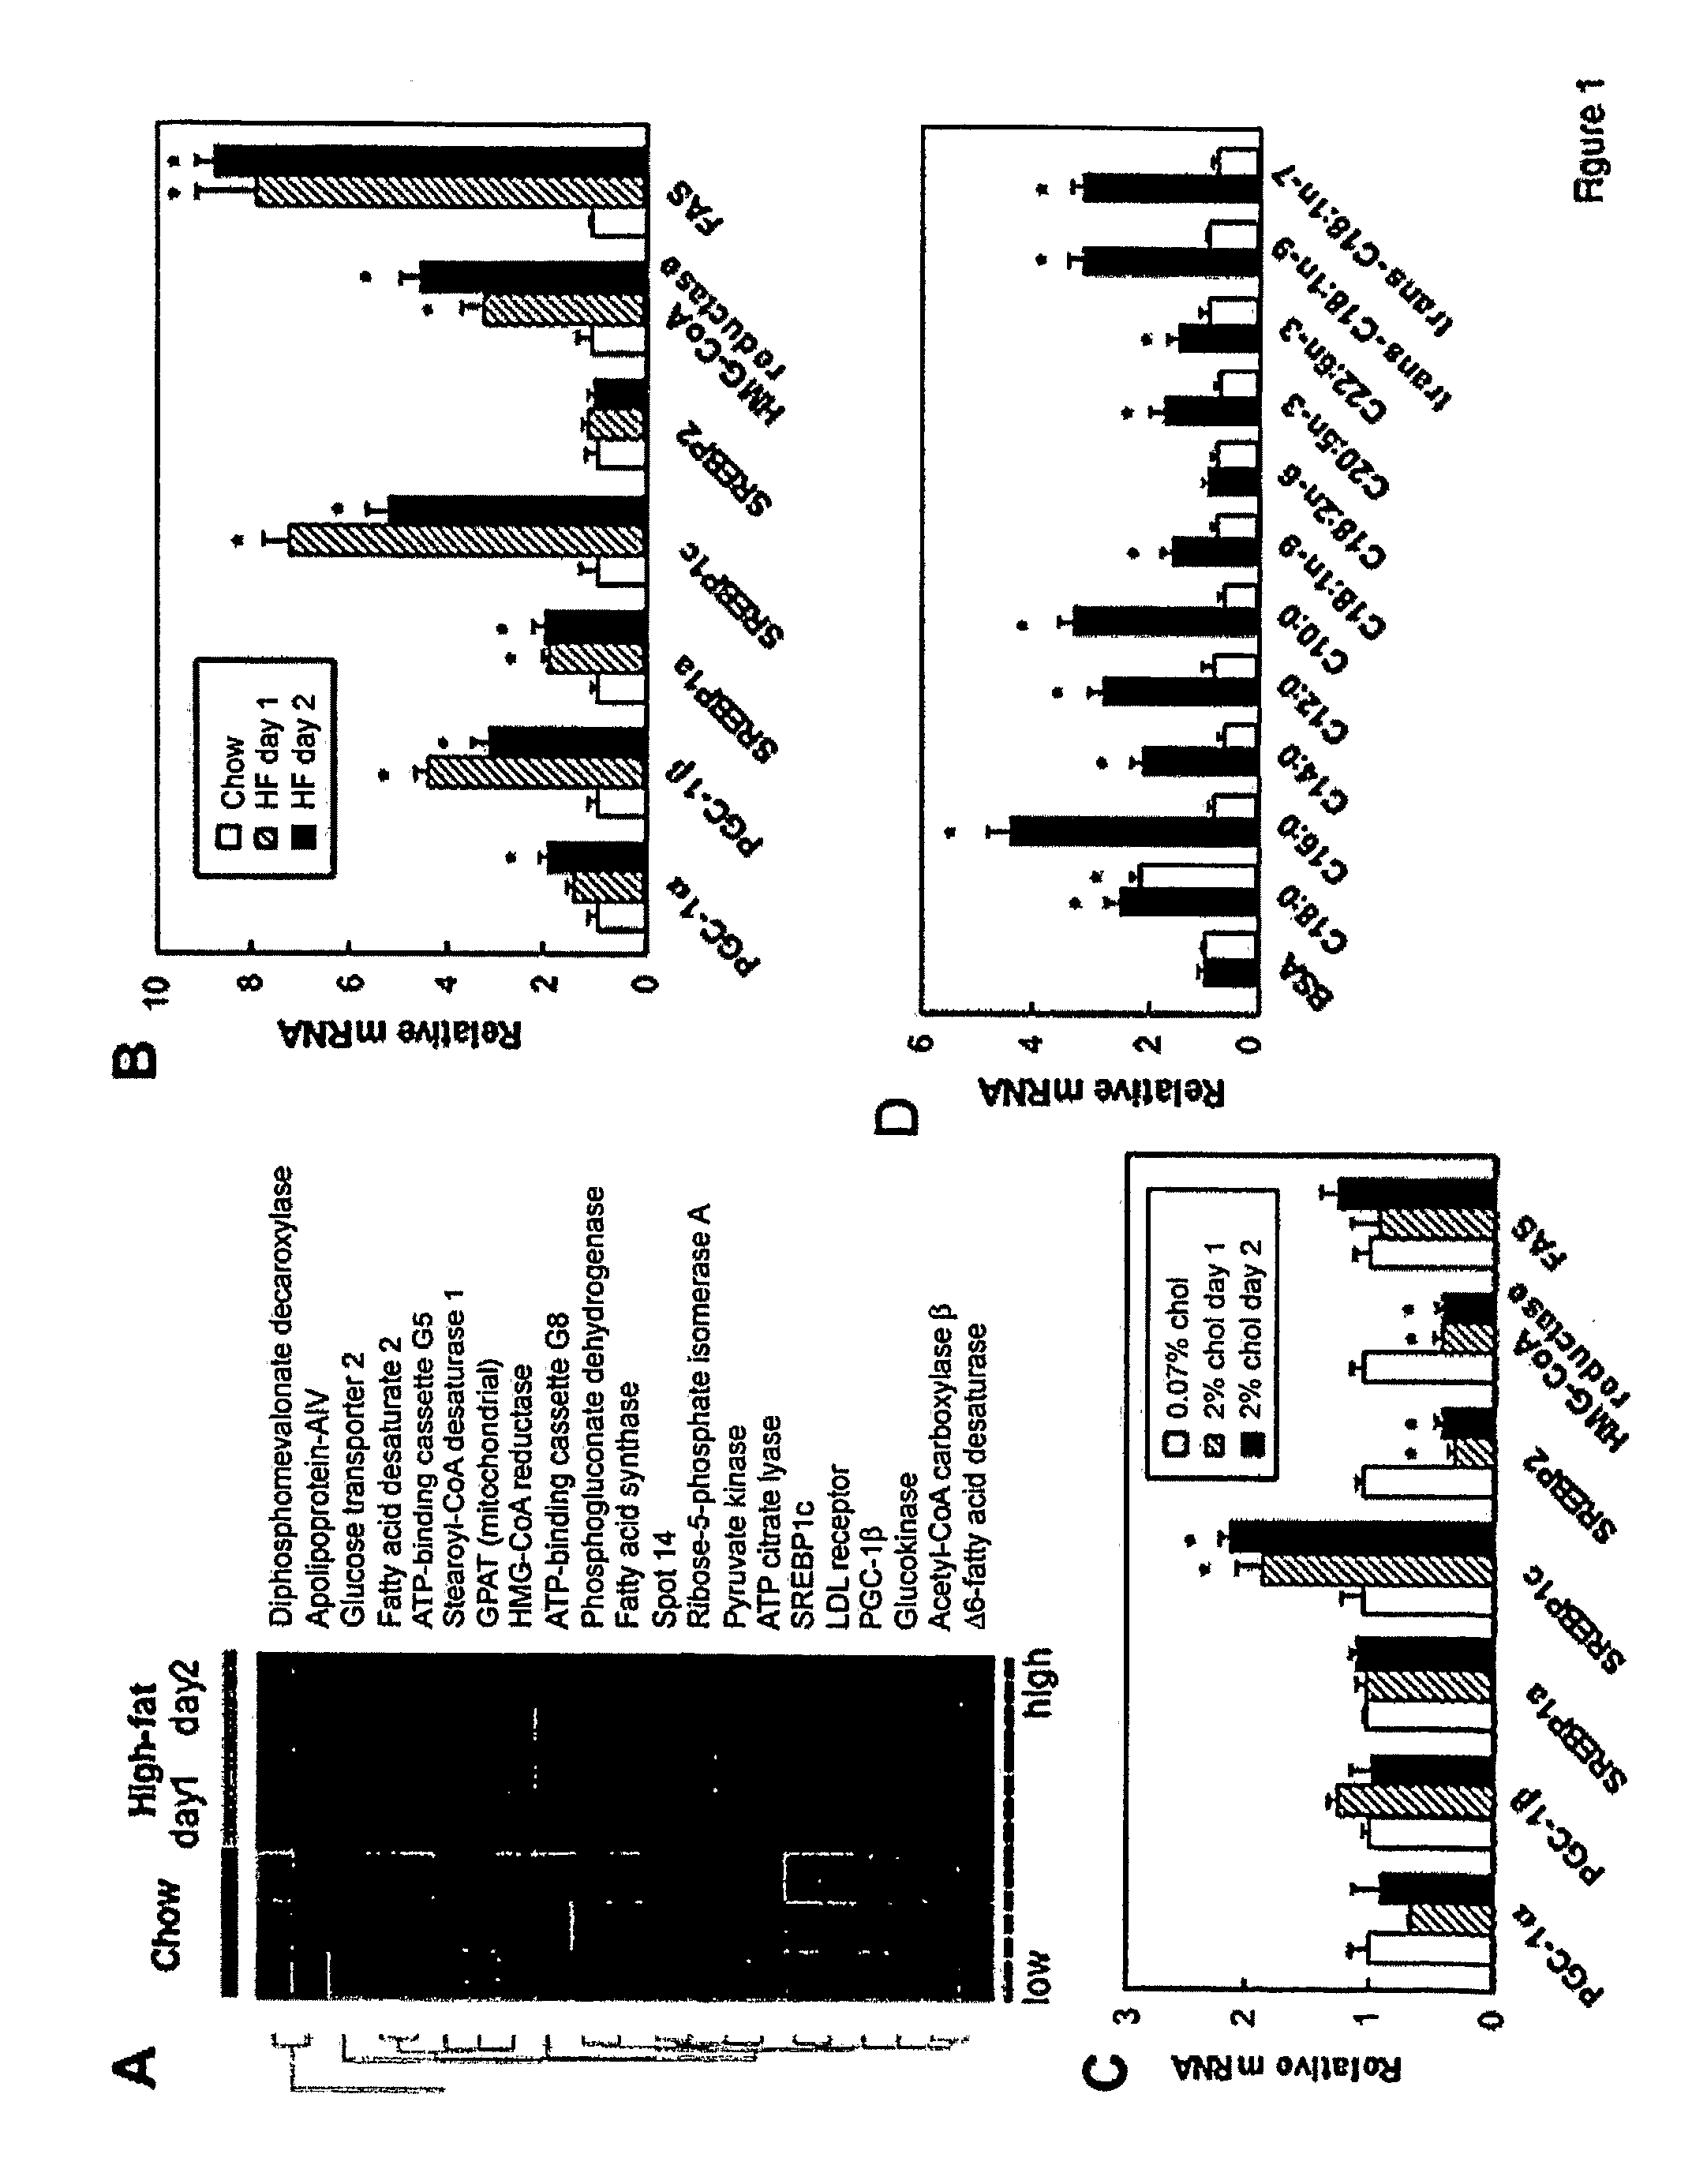 Compositions and Methods For Modulating Pgc-1Beta to Treat Lipid-Related Diseases and Disorders